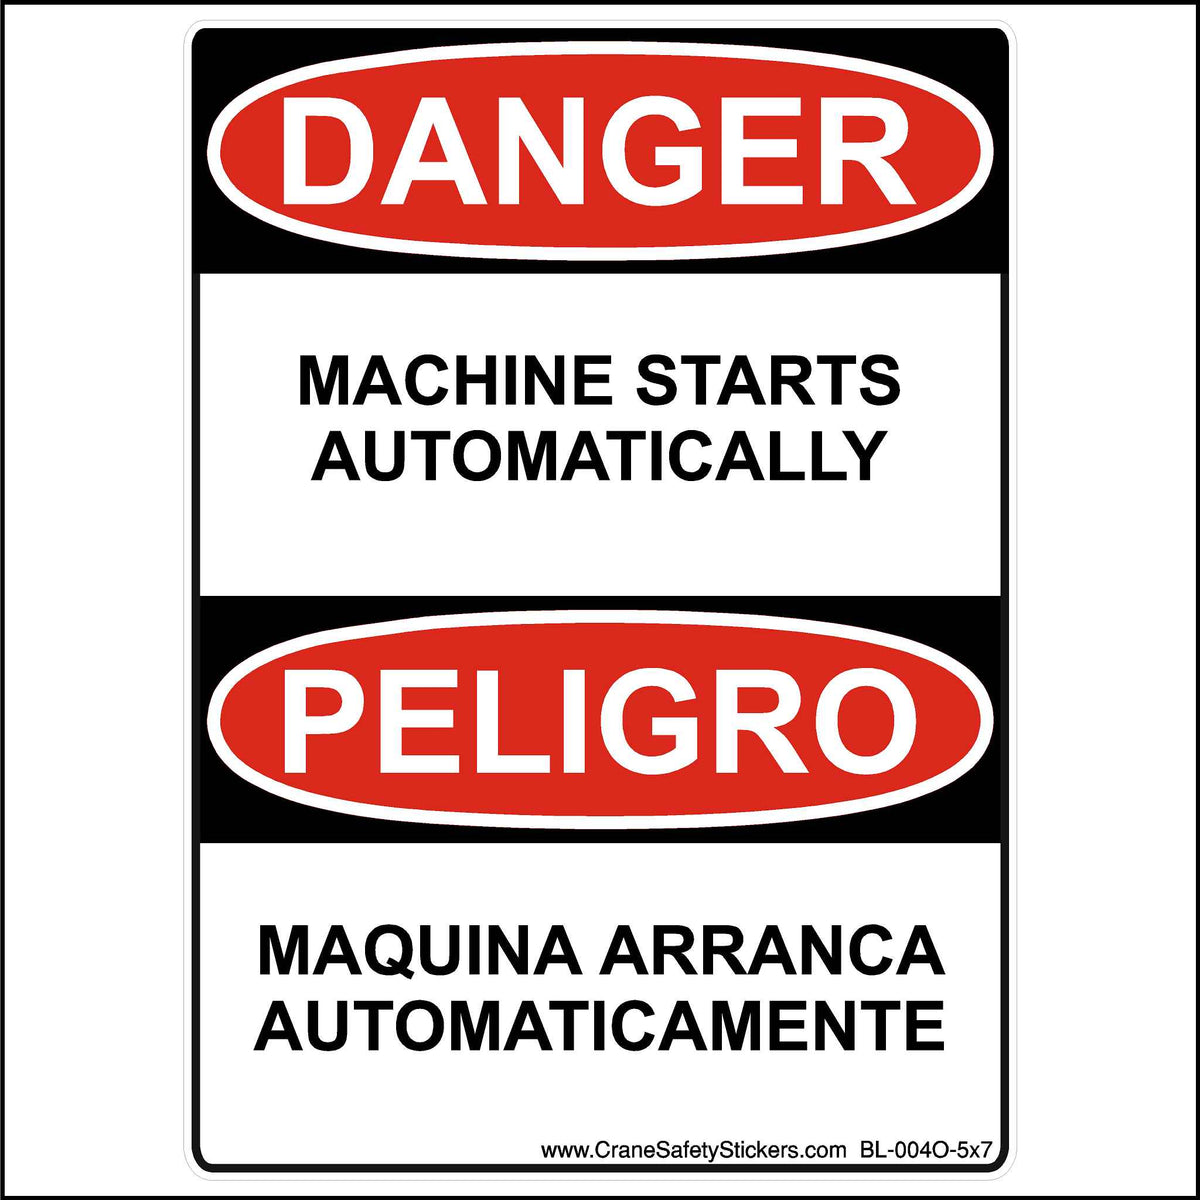 This 5x7 inch Bilingual English and Spanish Safety Sticker is Printed With. DANGER Machine Starts Automatically, PELIGRO maquina arranca automaticamente.